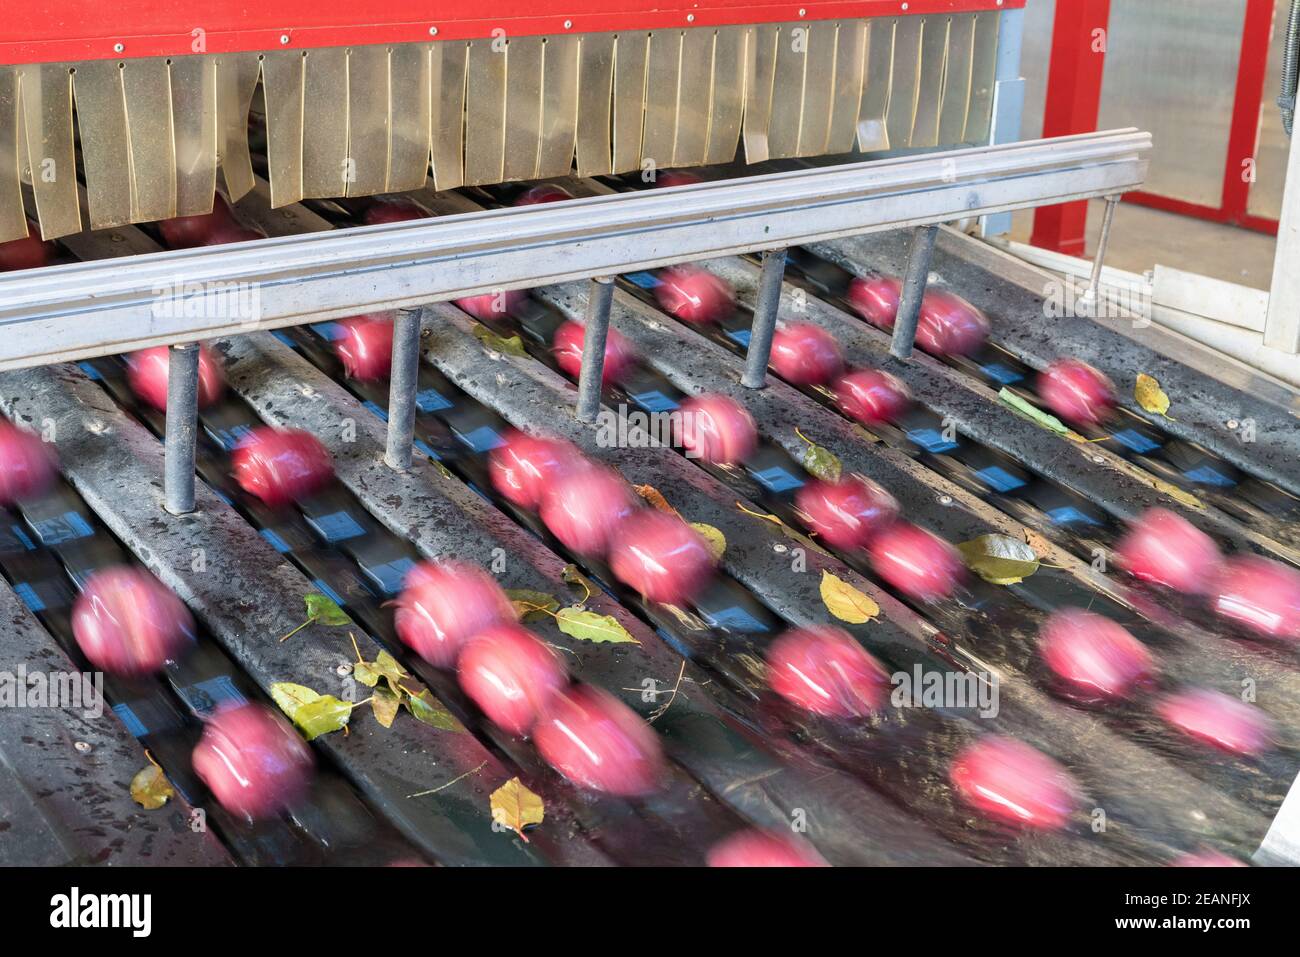 Blurred motion of apples flowing on conveyor belt after the washing process, Valtellina, Sondrio province, Lombardy, Italy, Europe Stock Photo